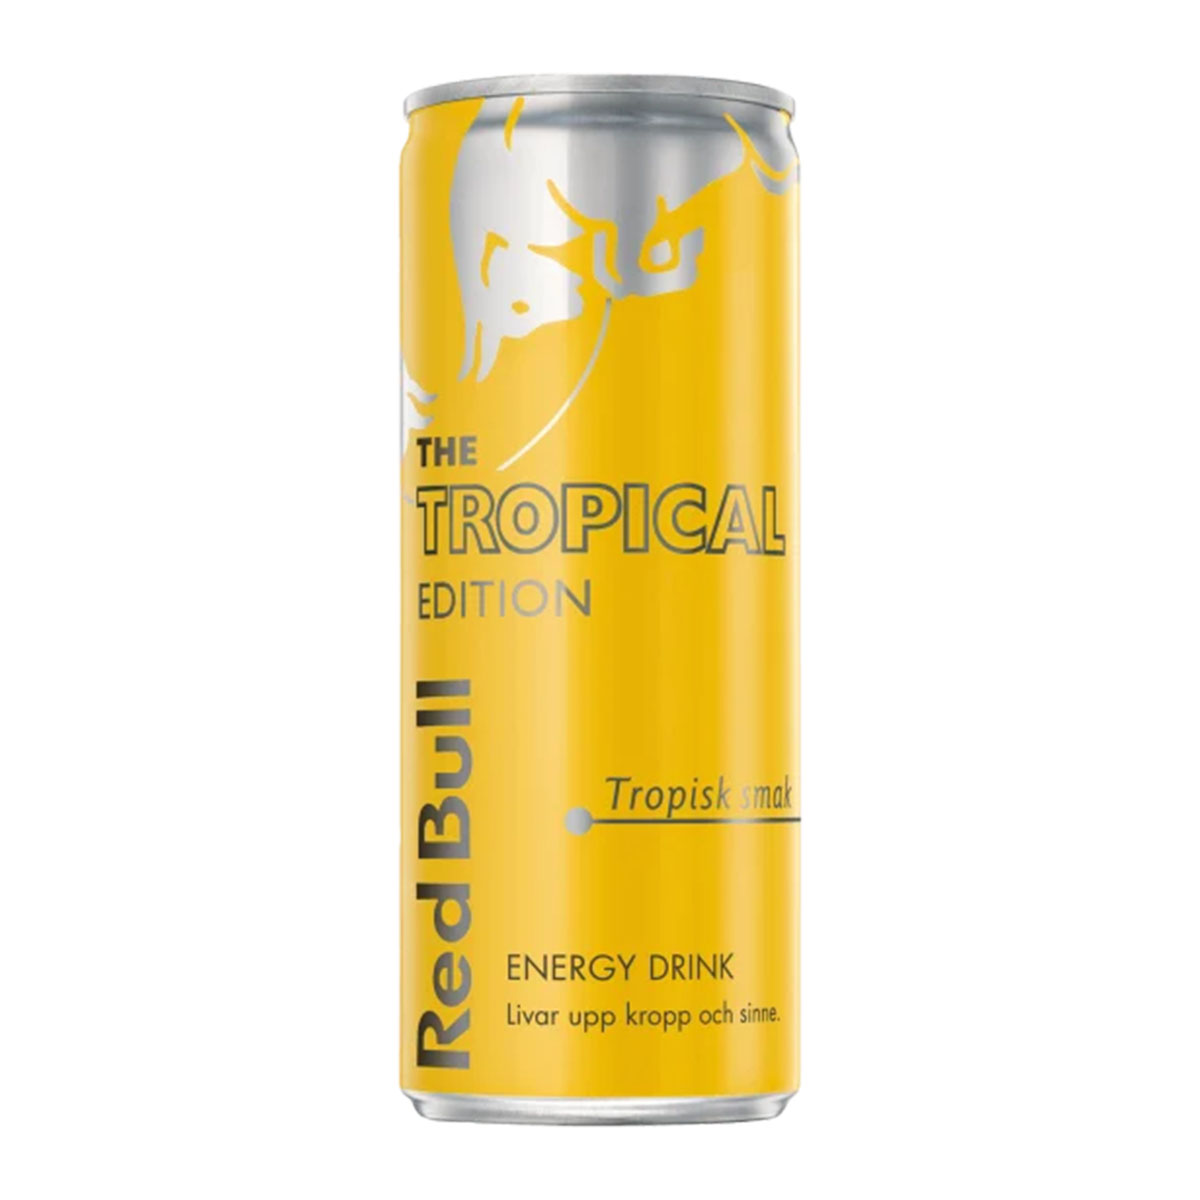 Energidryck, Red Bull tropical edition 25 cl